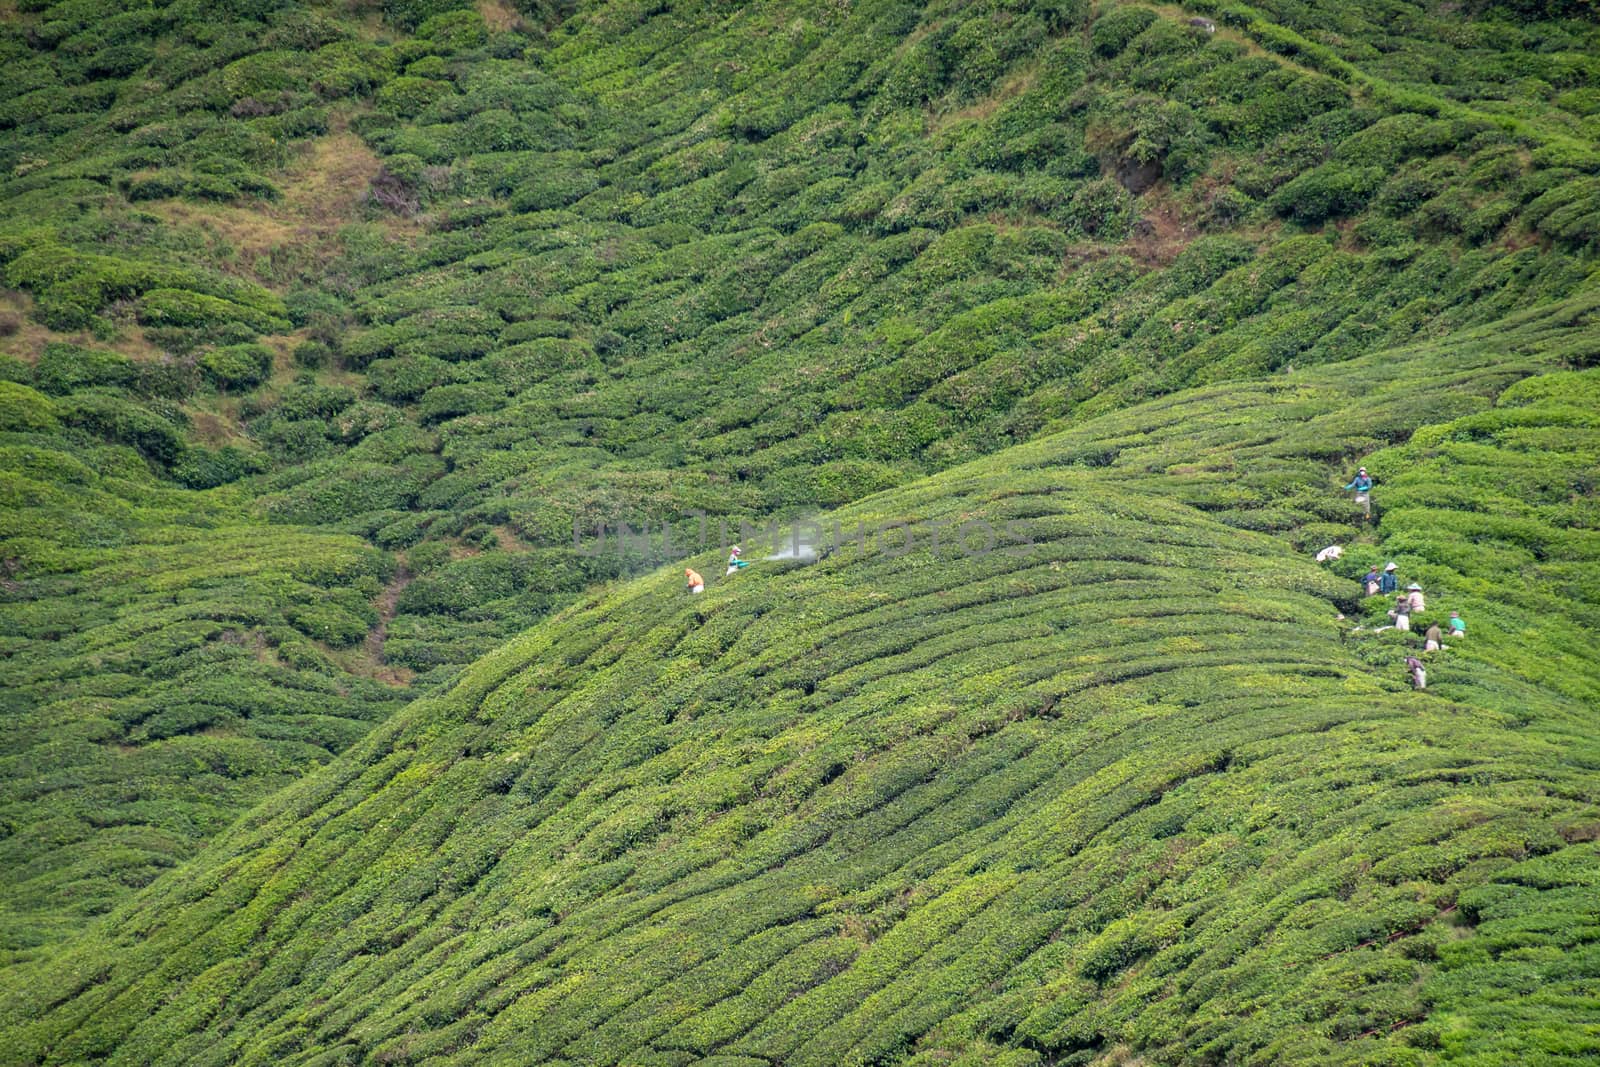 Workers at tea plantation harvesting tea leaves and spraying fungicides by MXW_Stock